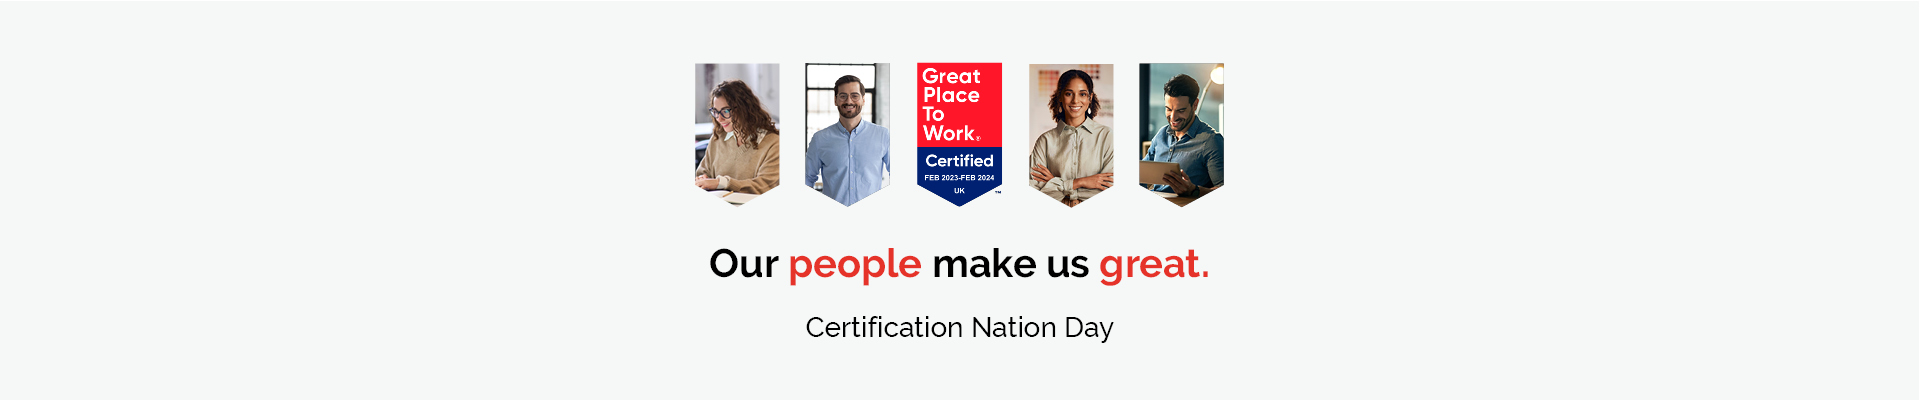 It’s Great Place to Work Certification Nation Day!